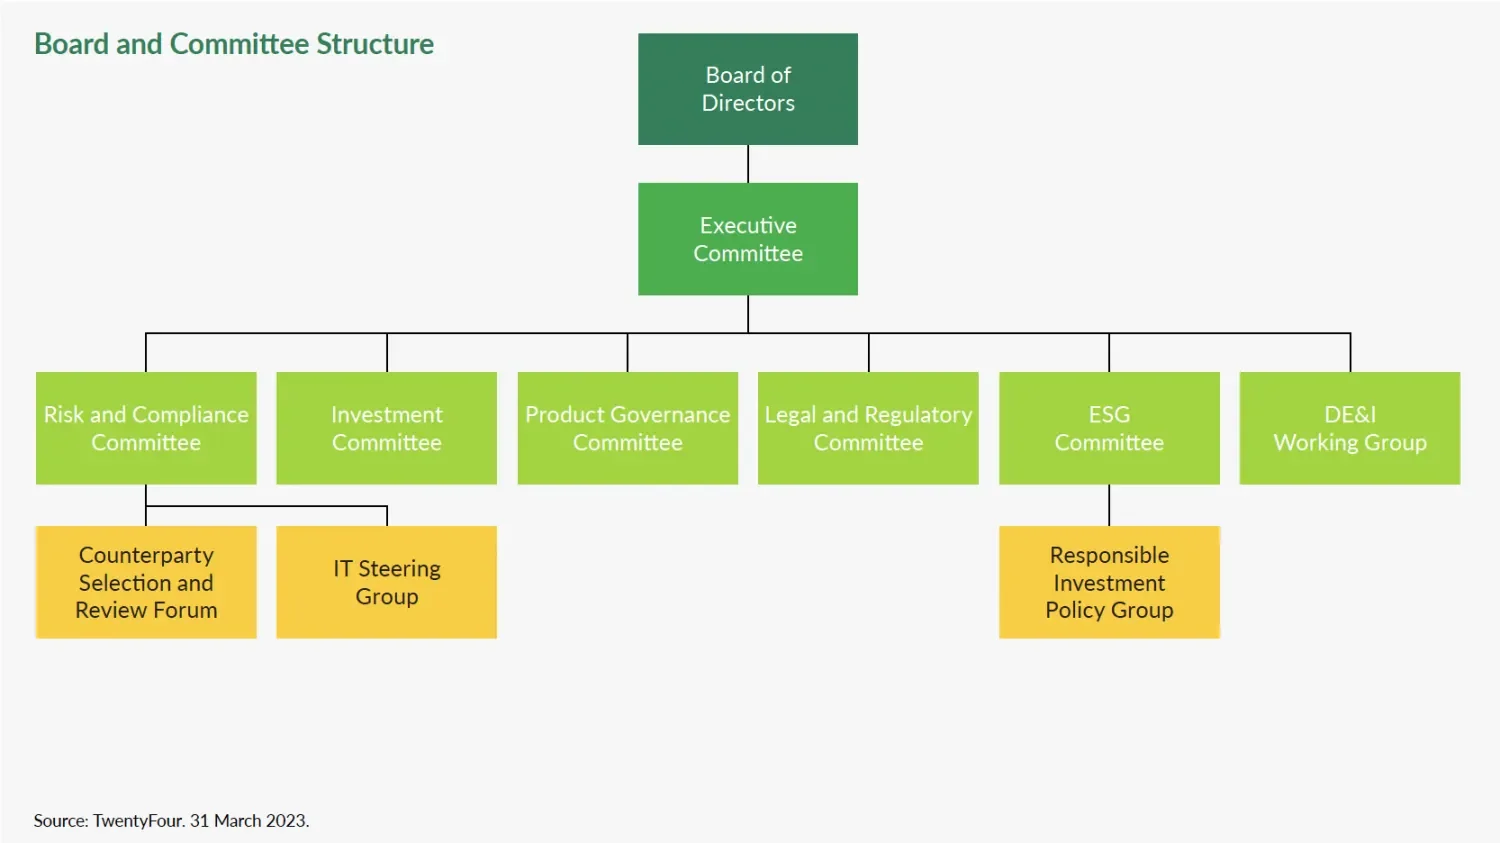 Board and committee structure